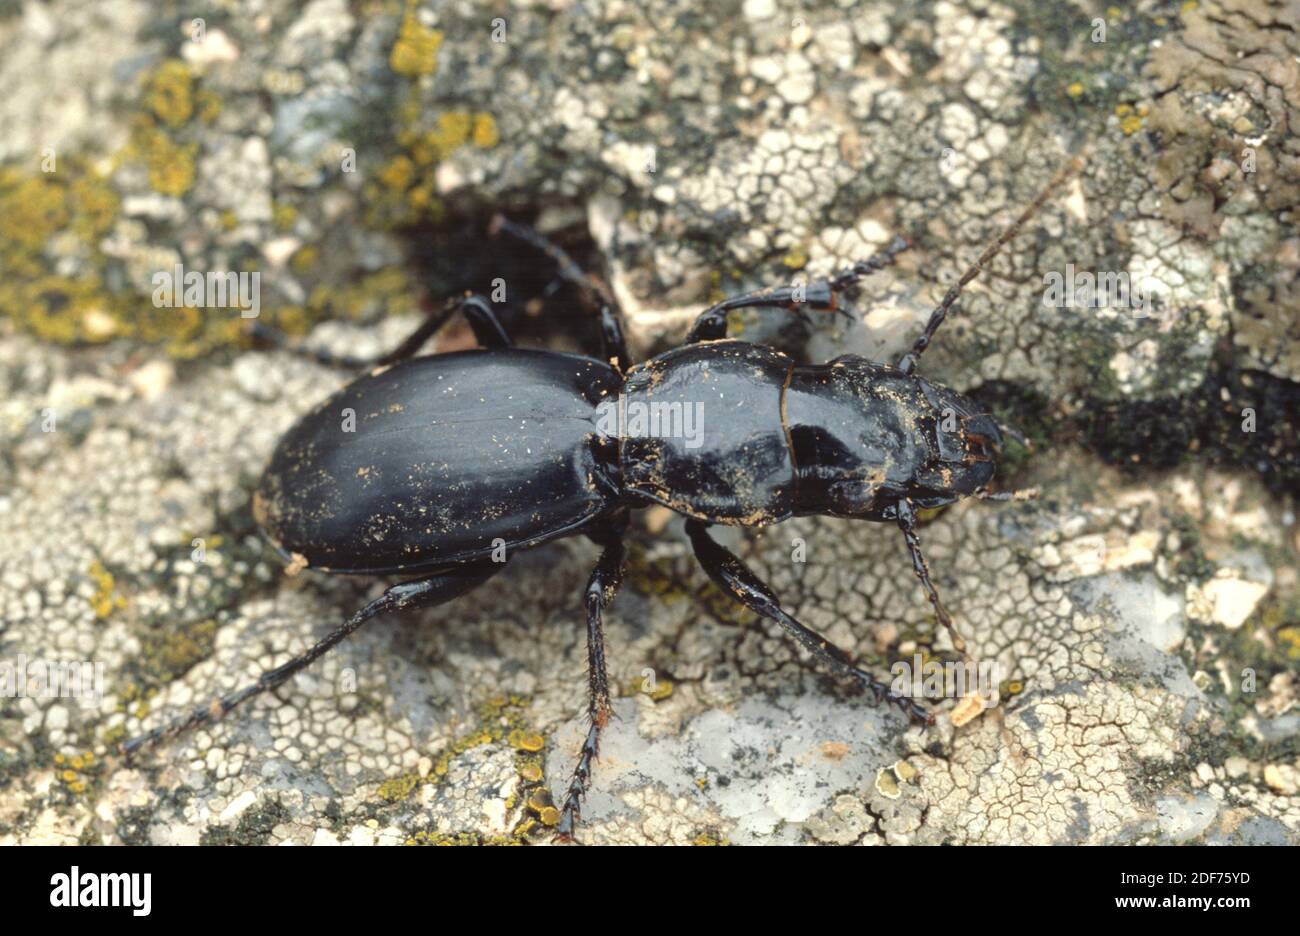 Ground beetle (Broscus cephalotes) is an insect native to Europe. Stock Photo